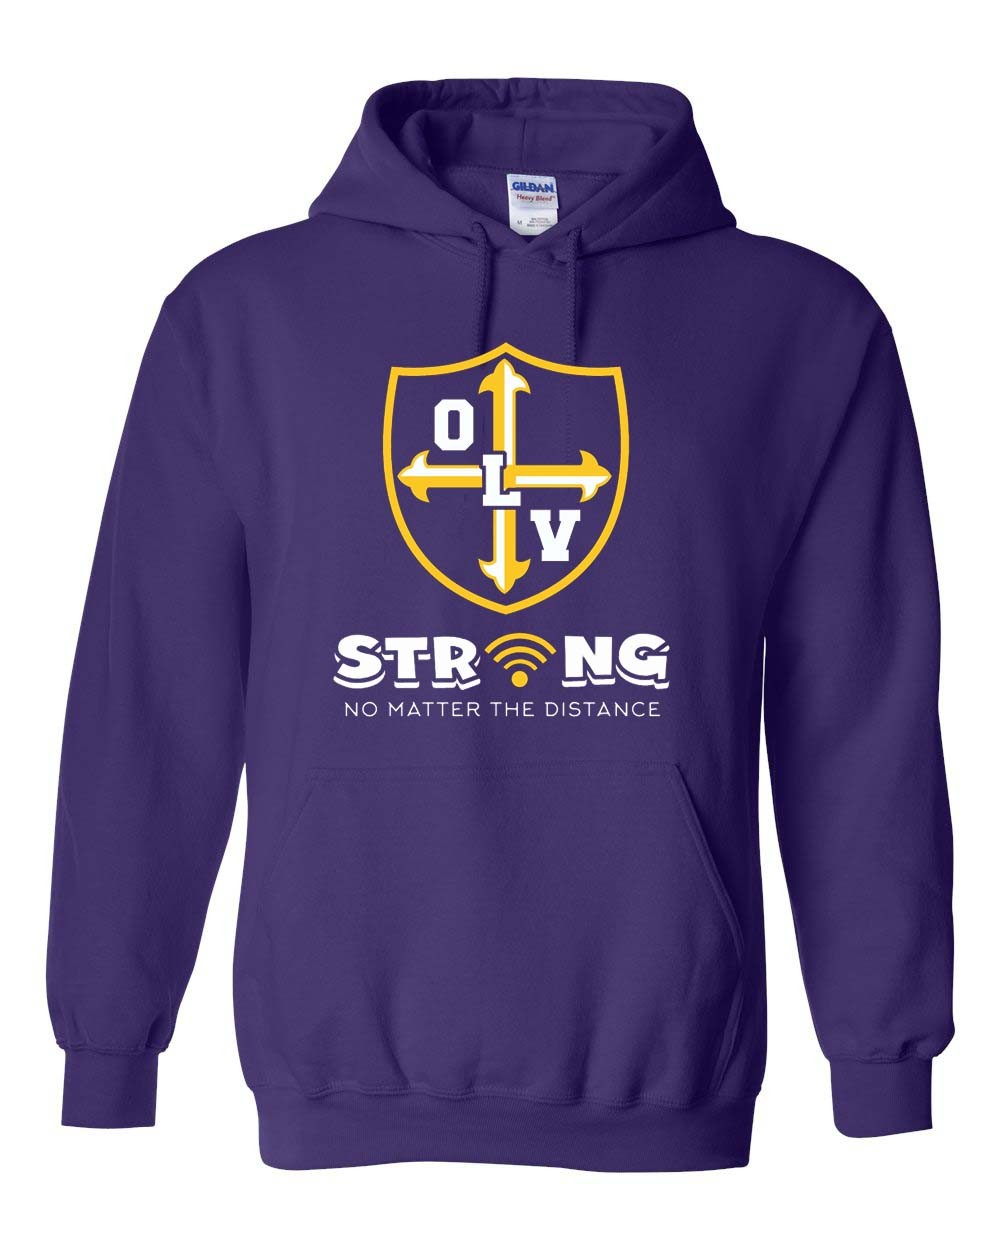 OLV Spirit Pullover Hoodie w/ Strong Logo - Please Allow 2-3 Weeks for Delivery